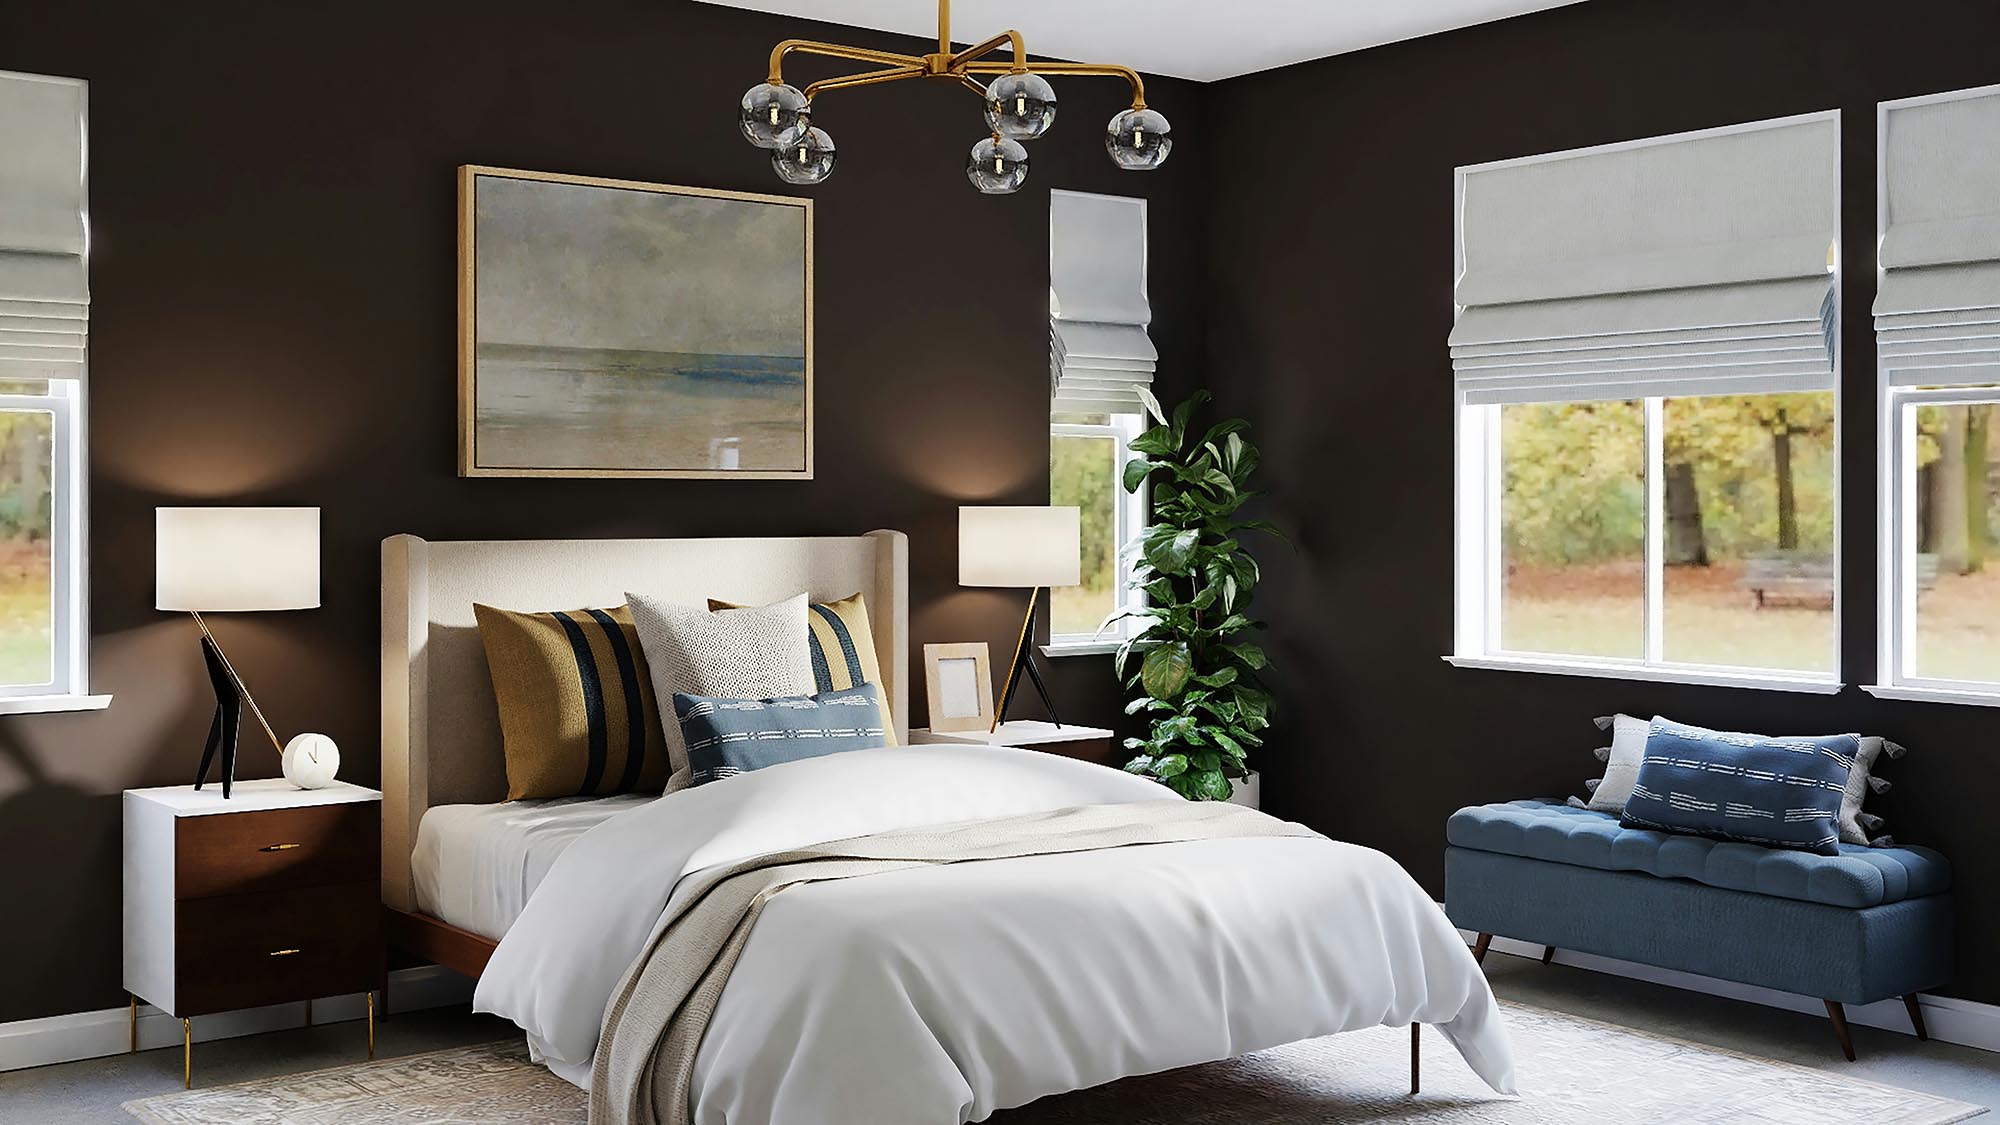 Transform Your Space: Bedroom Remodeling Ideas and Inspiration